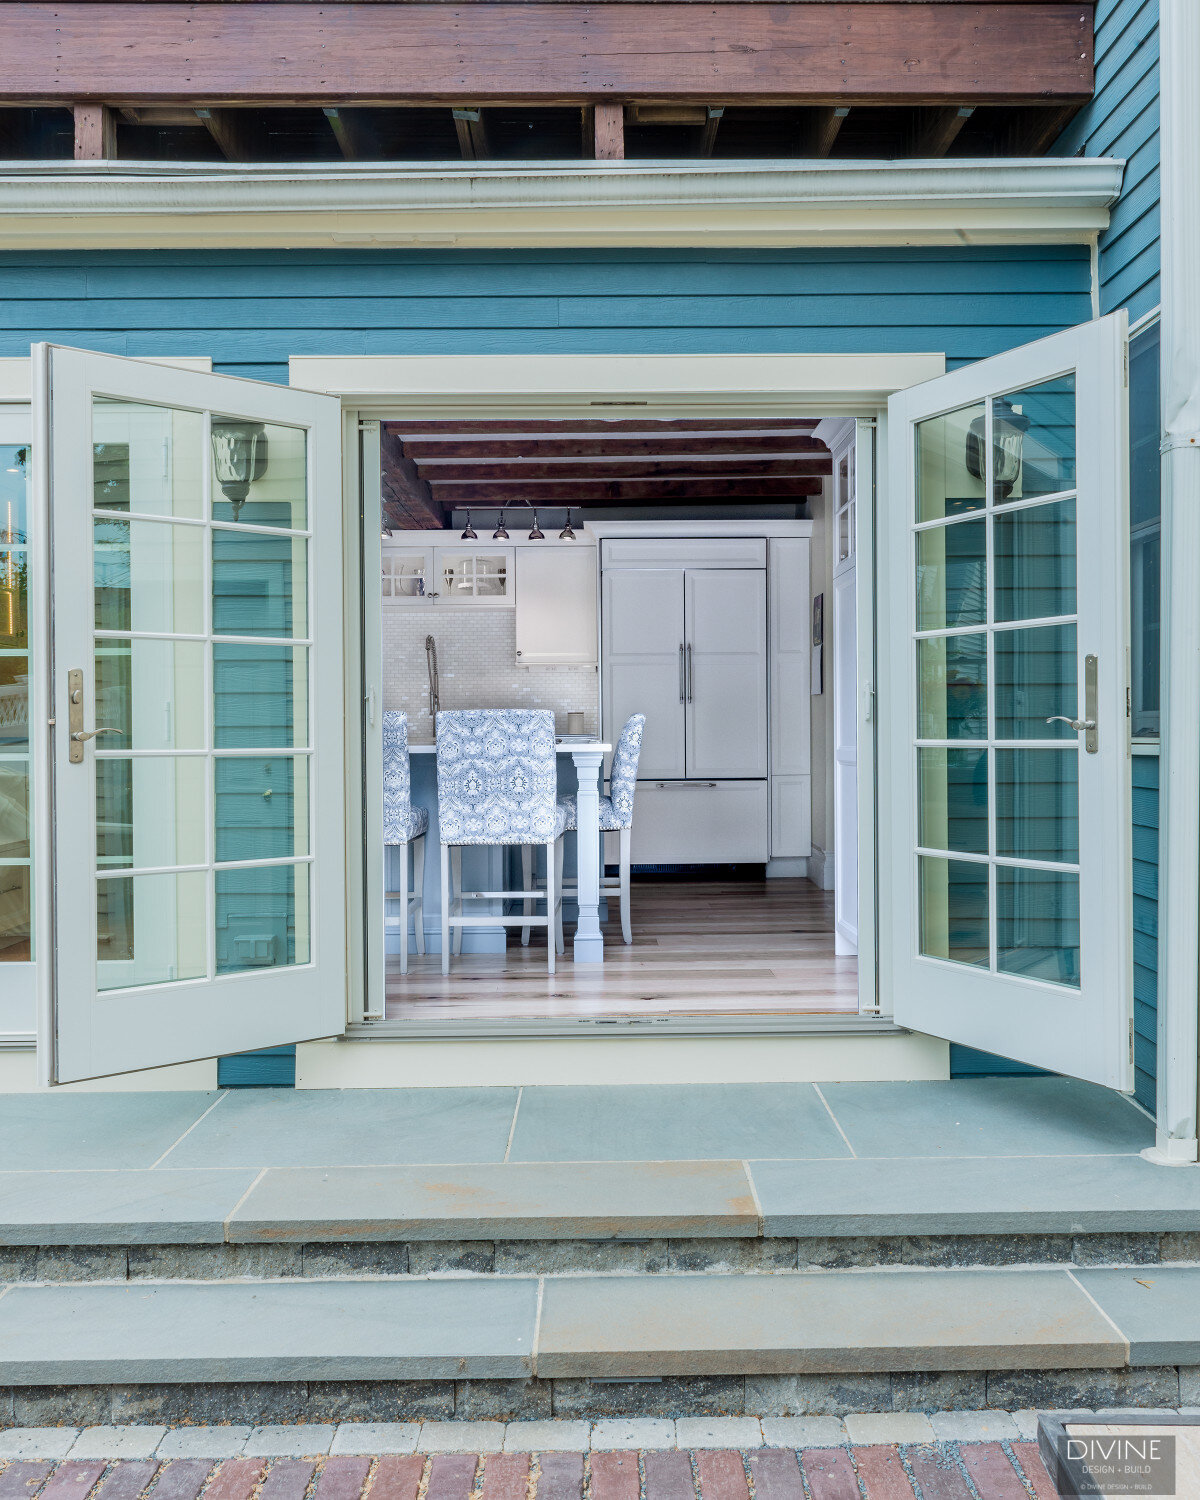 french doors that open from the kitchen and into the back yard. Blue, wood siding on exterior of house